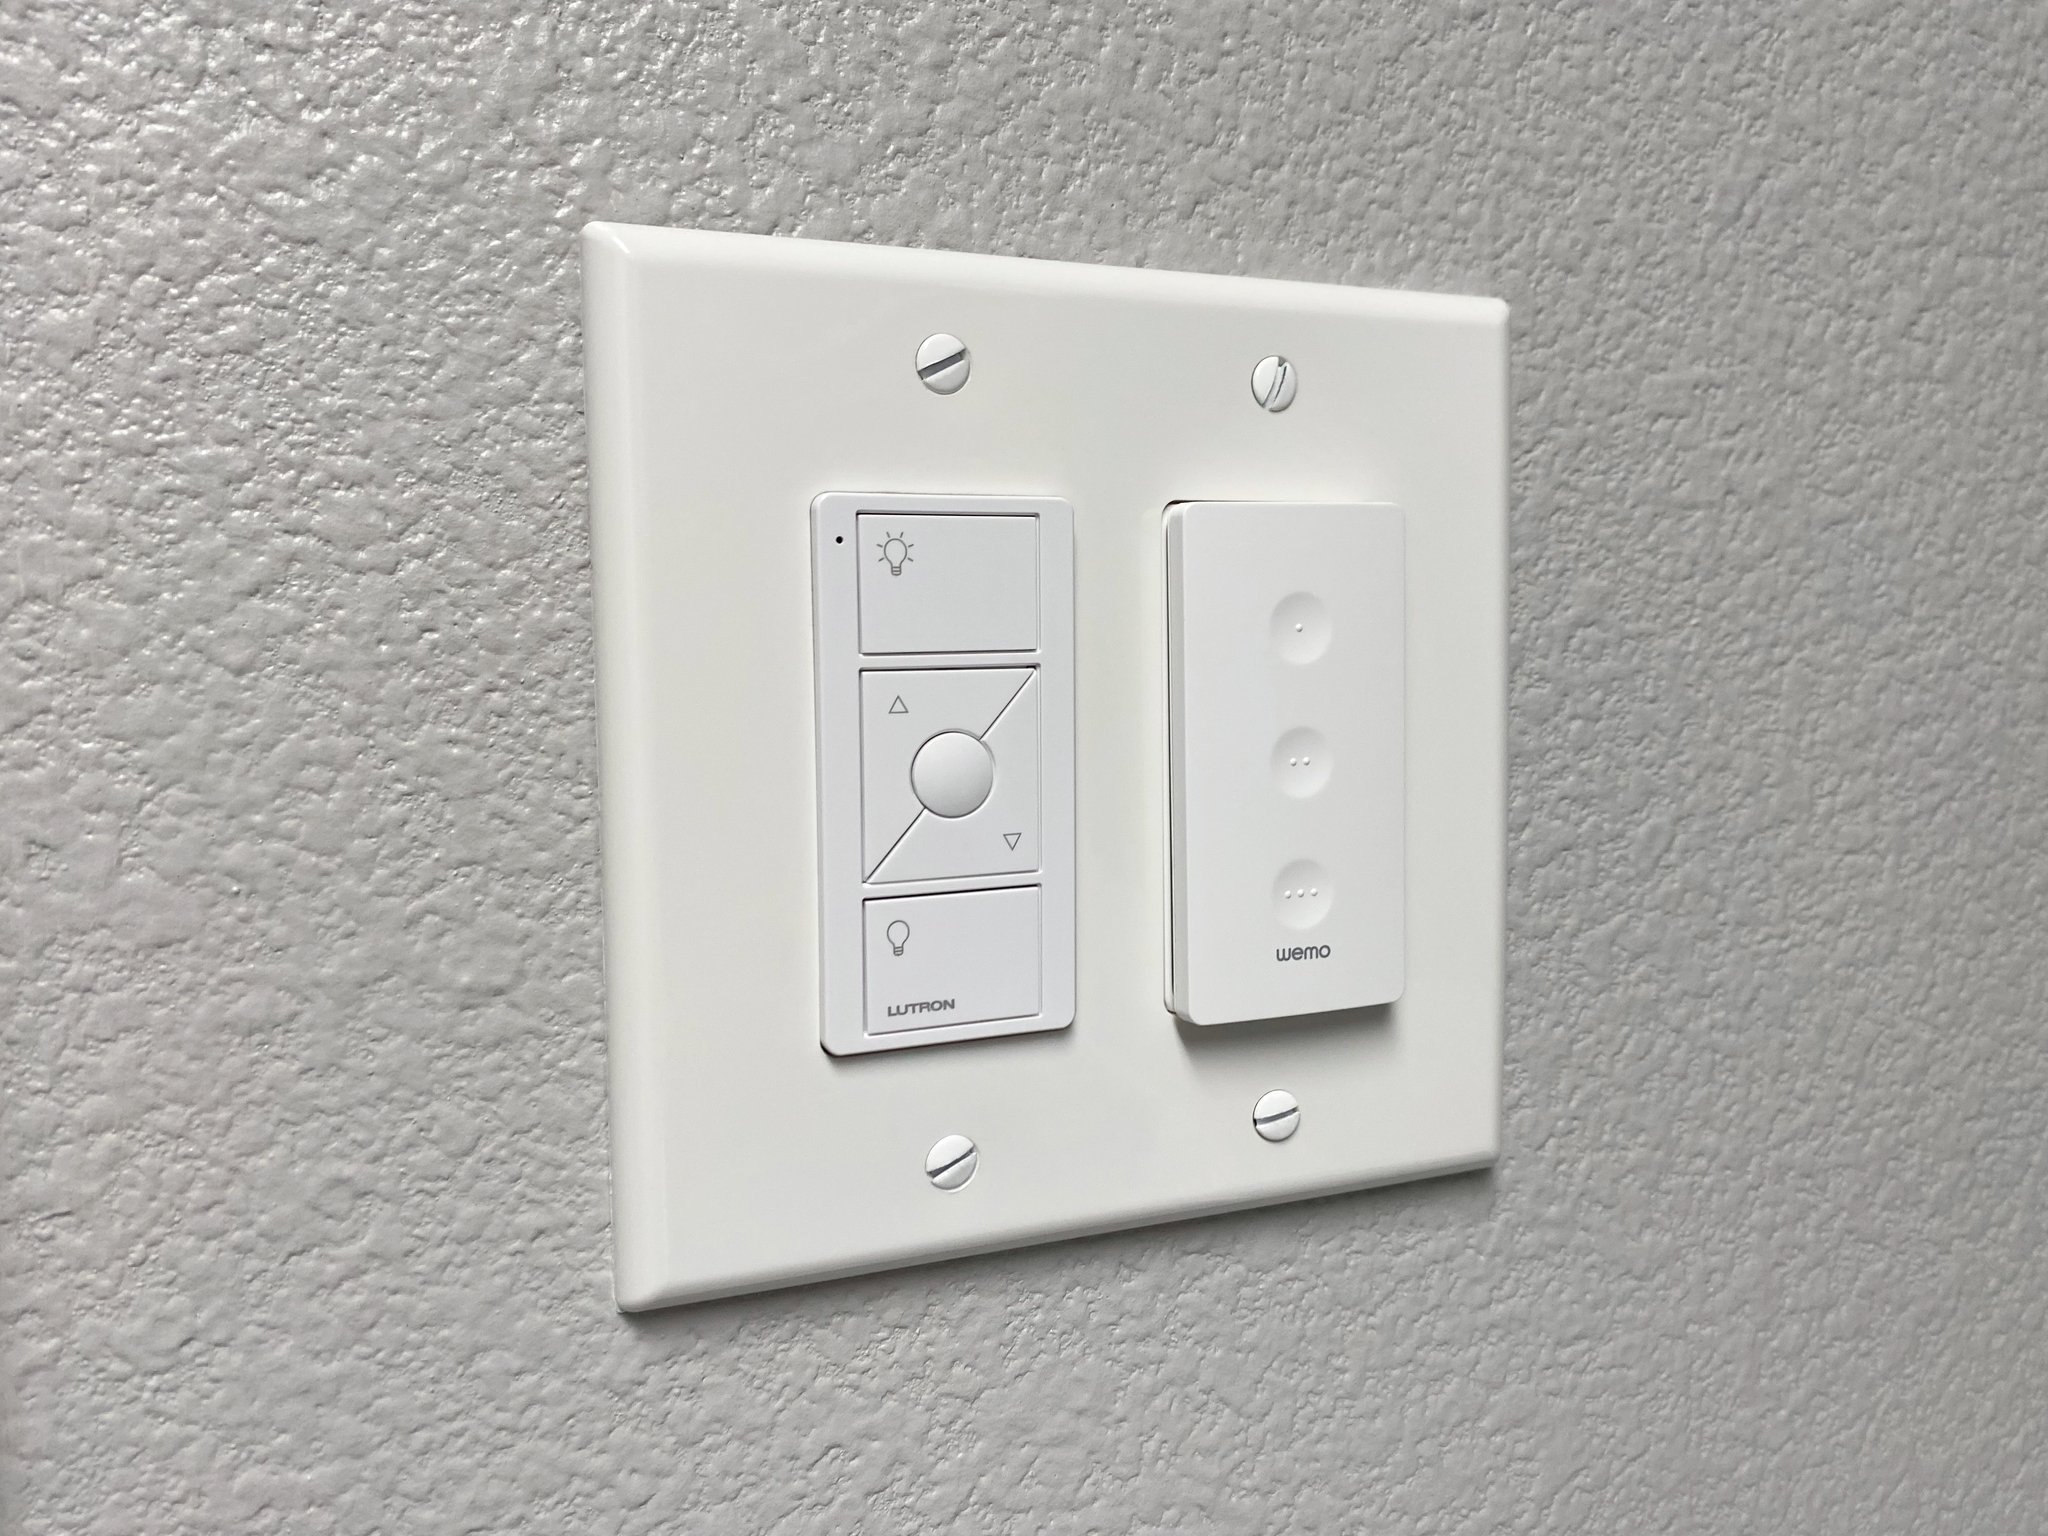 Wemo Stage Scene Controller Review Wall Mount